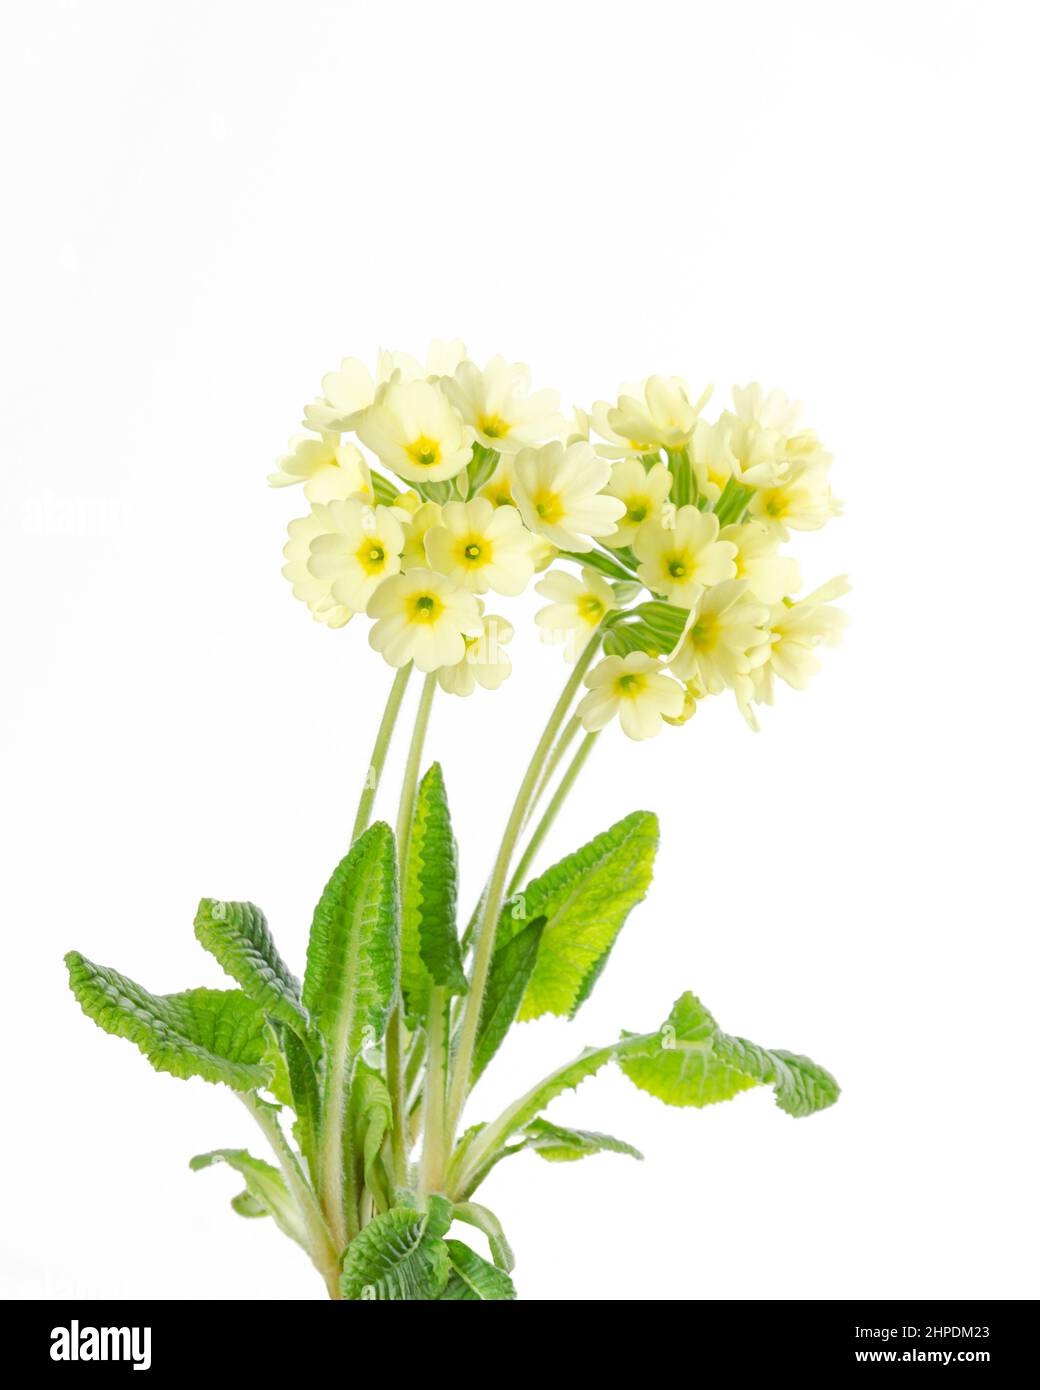 Common primrose, Primula vulgaris, front view, on white background. Also known as English primrose, is a species of flowering plant. Stock Photo